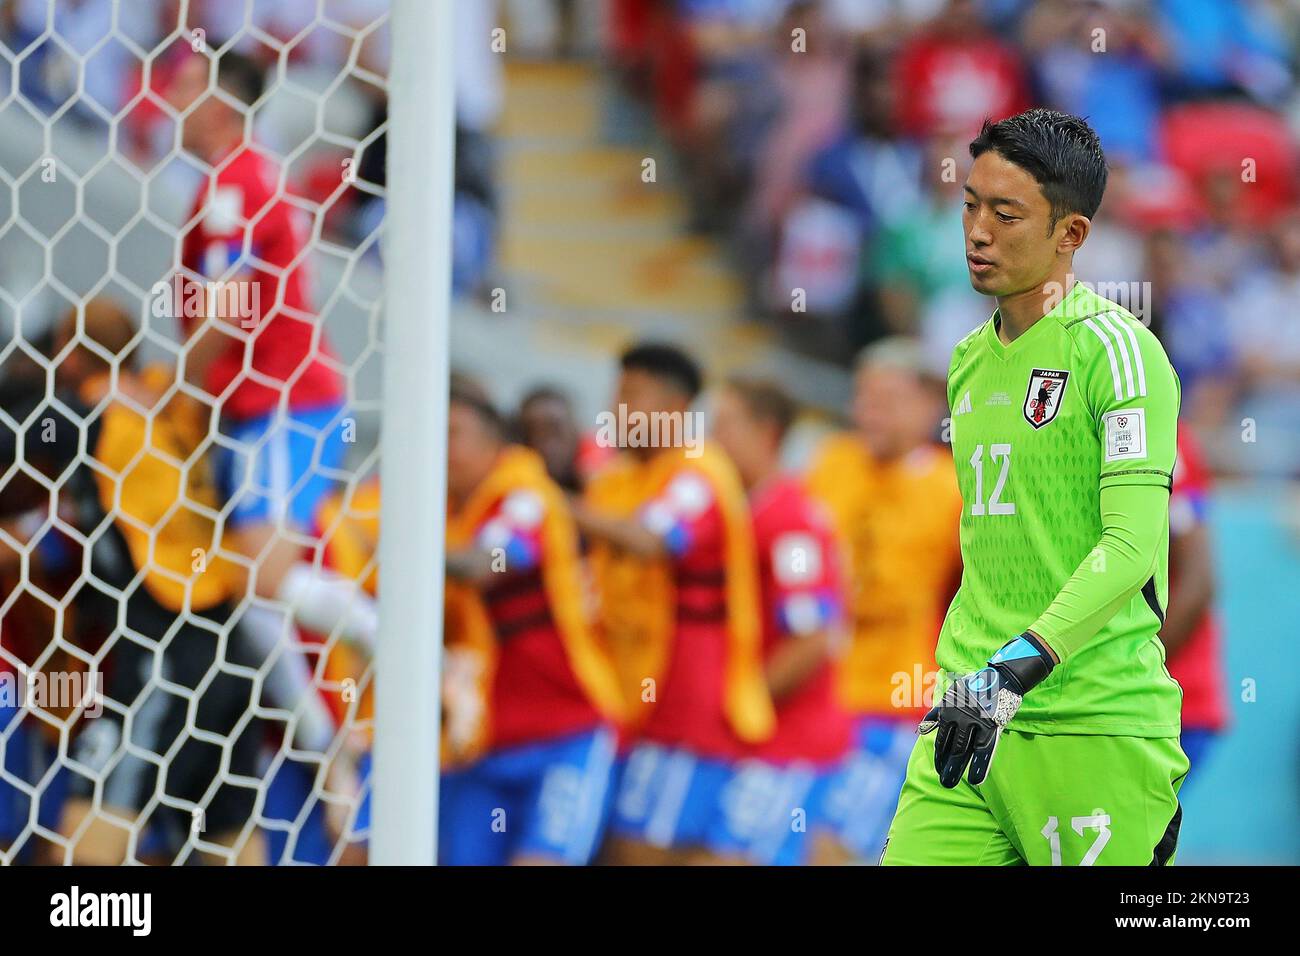 Shuichi Gonda do Japão during the FIFA World Cup Qatar 2022 match, Group E, between Japan and Costa Rica played at Ahmed bin Ali Stadium on Nov 27, 2022 in Ar-Rayyan, Qatar. (Photo by PRESSIN) Stock Photo